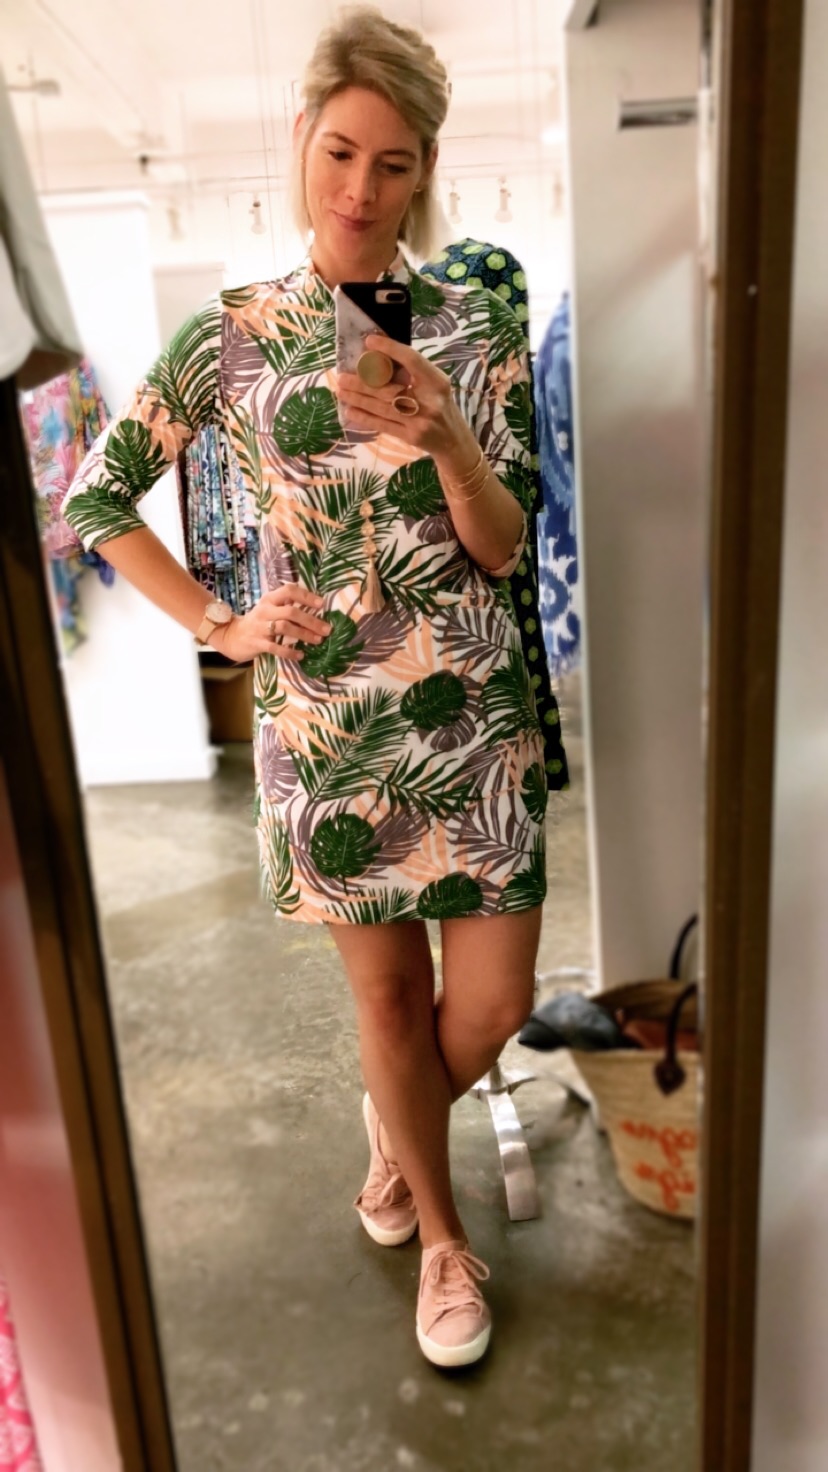 Doral Dress in Hideaway Apricot Green from The Katherine Way Resort 2018/2019 January Collection worn by Fashion Blogger Stephanie Mack of The Borrowed Babes Fashion Blog